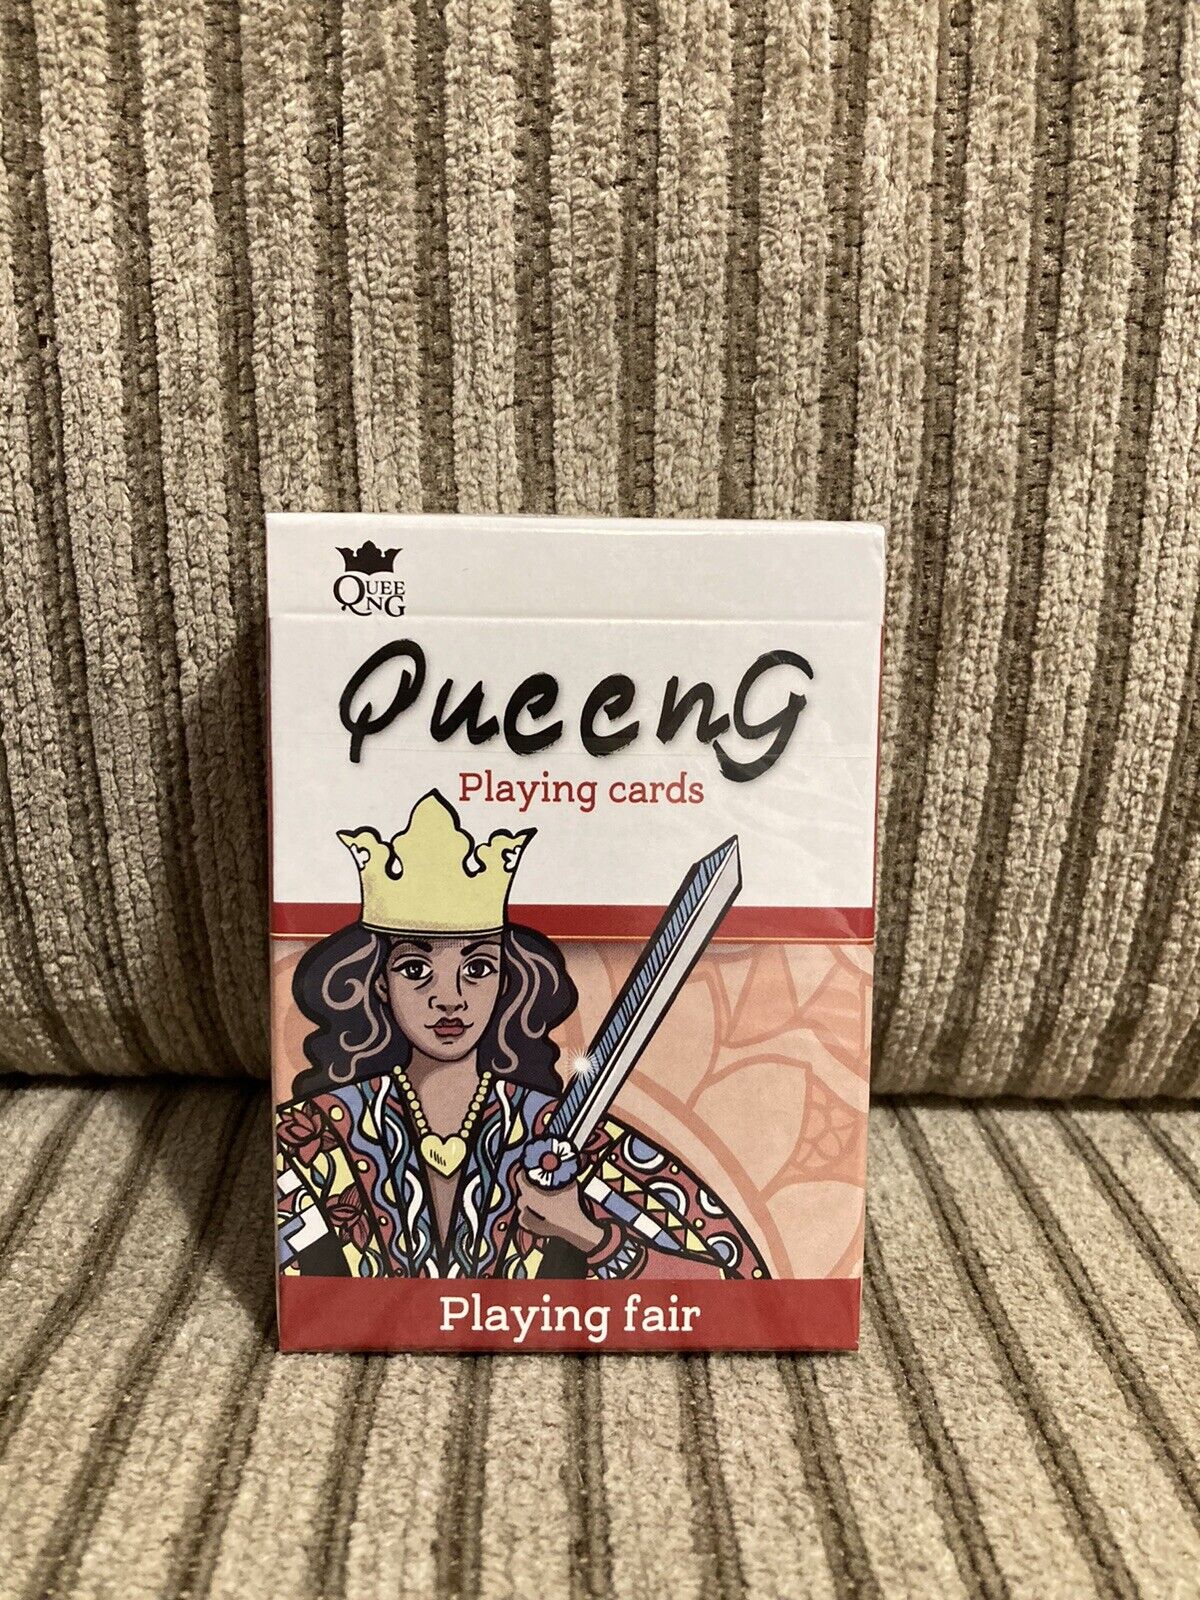 NEW Queen G Playing Cards Deck 2nd Edition Playing Fair Gender Equality Feminist